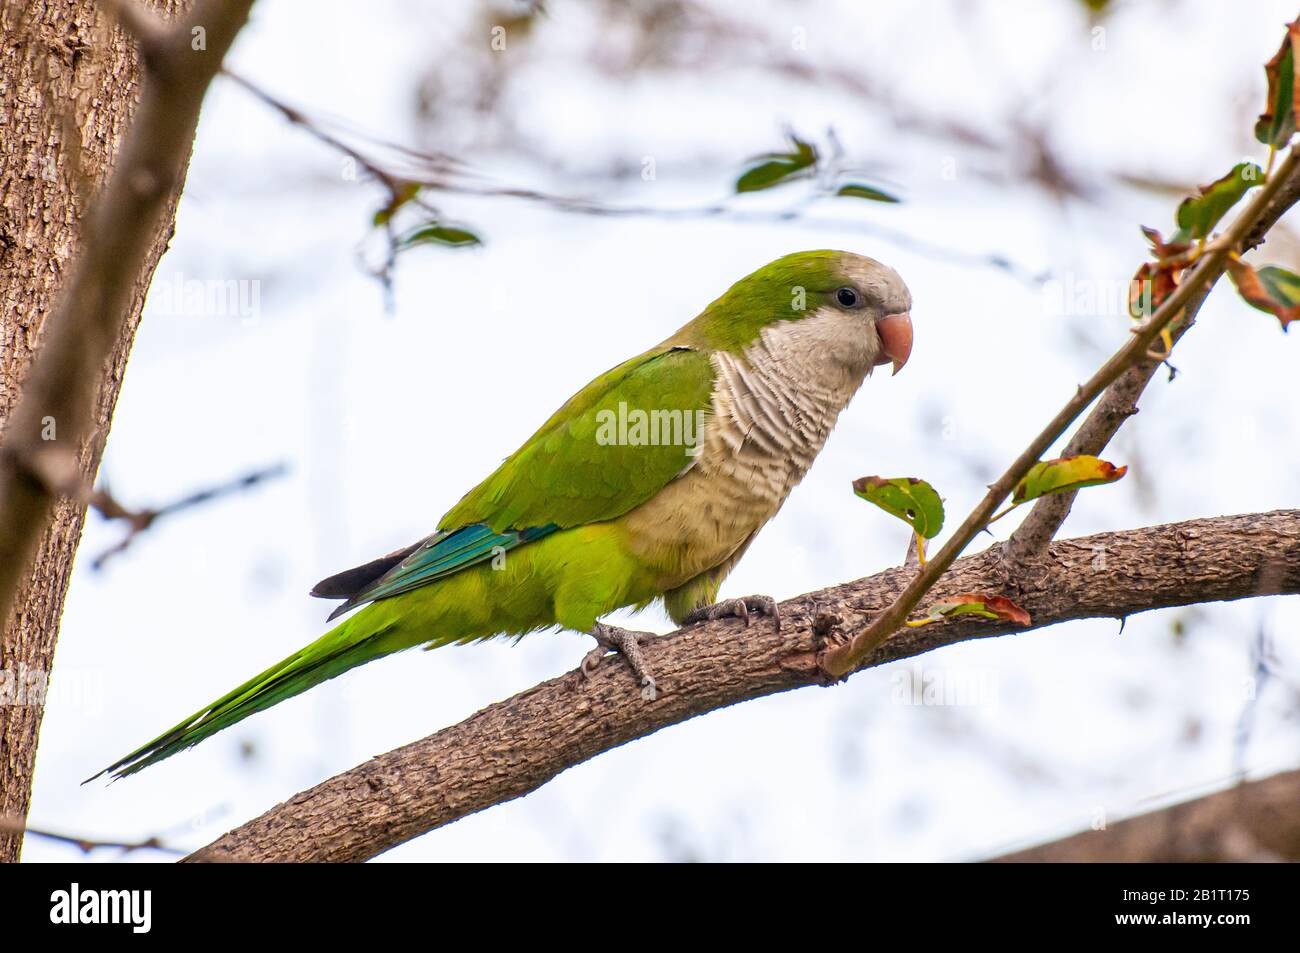 Alexandrine parakeet (Psittacula eupatria), also known as the Alexandrine parrot This Parakeet has established feral populations in various parts of t Stock Photo